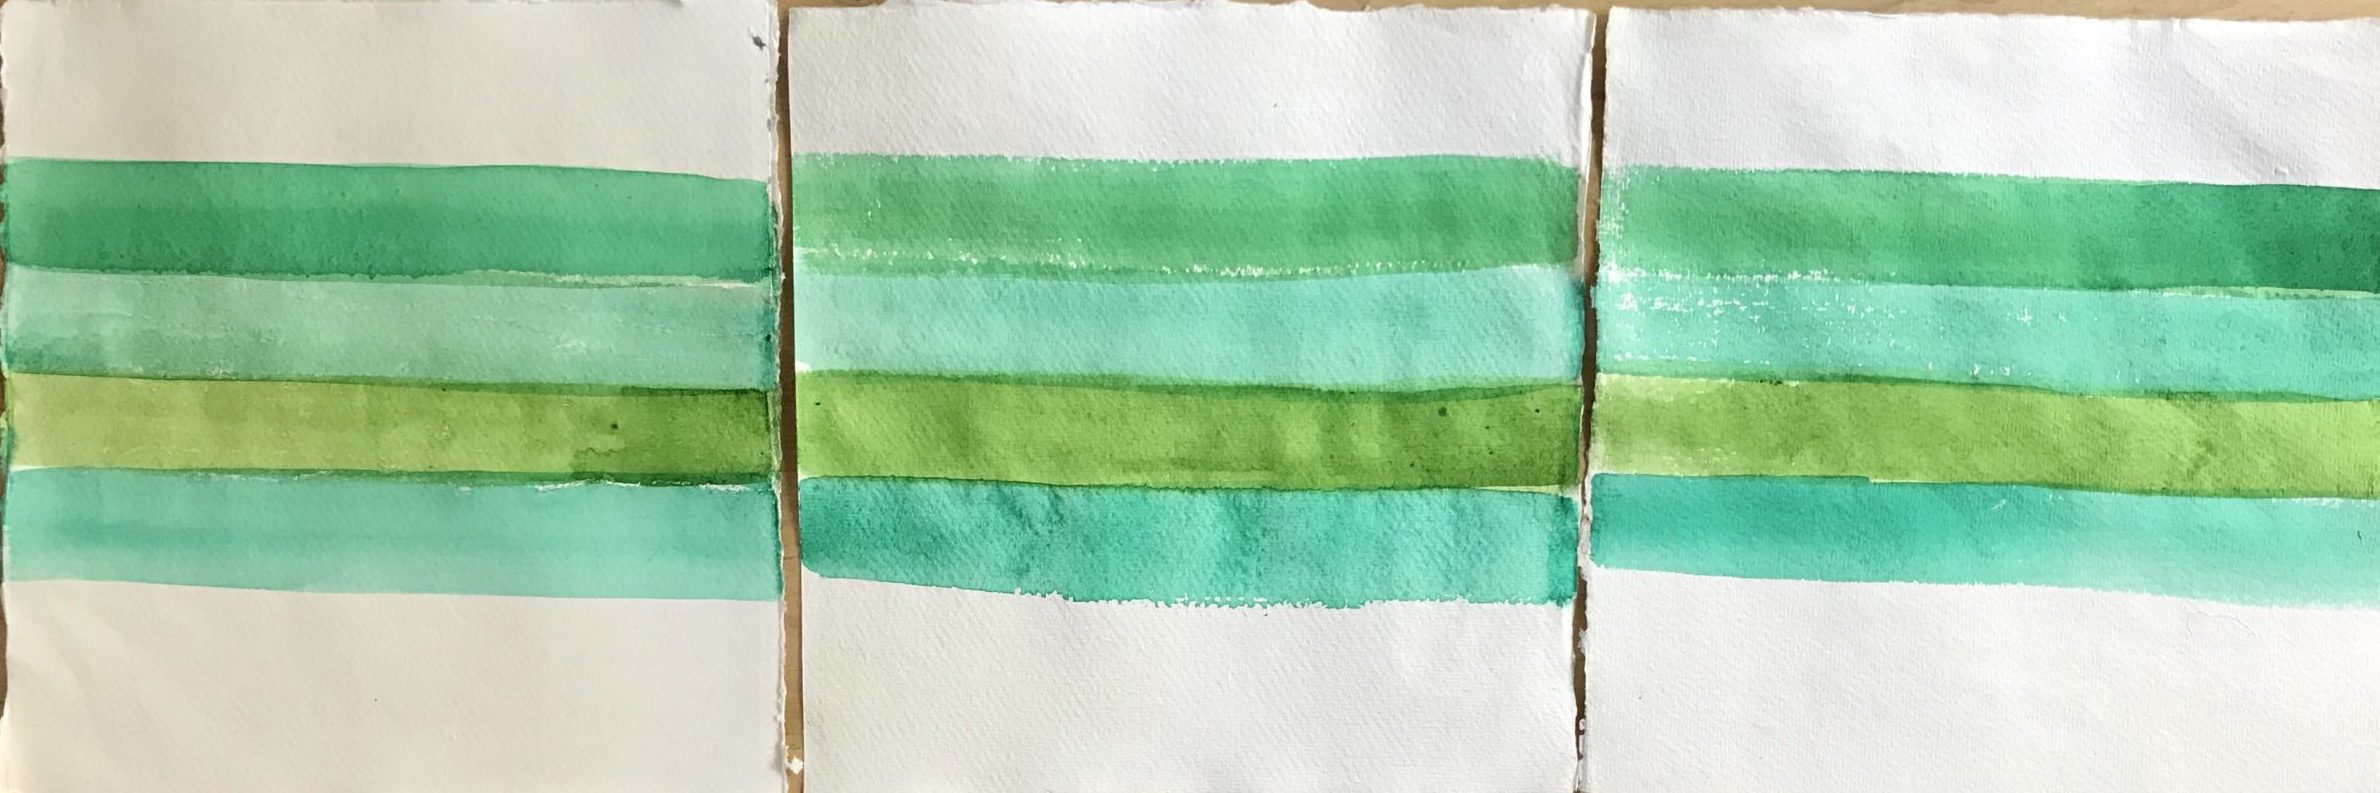 Stripes of watercolor on paper